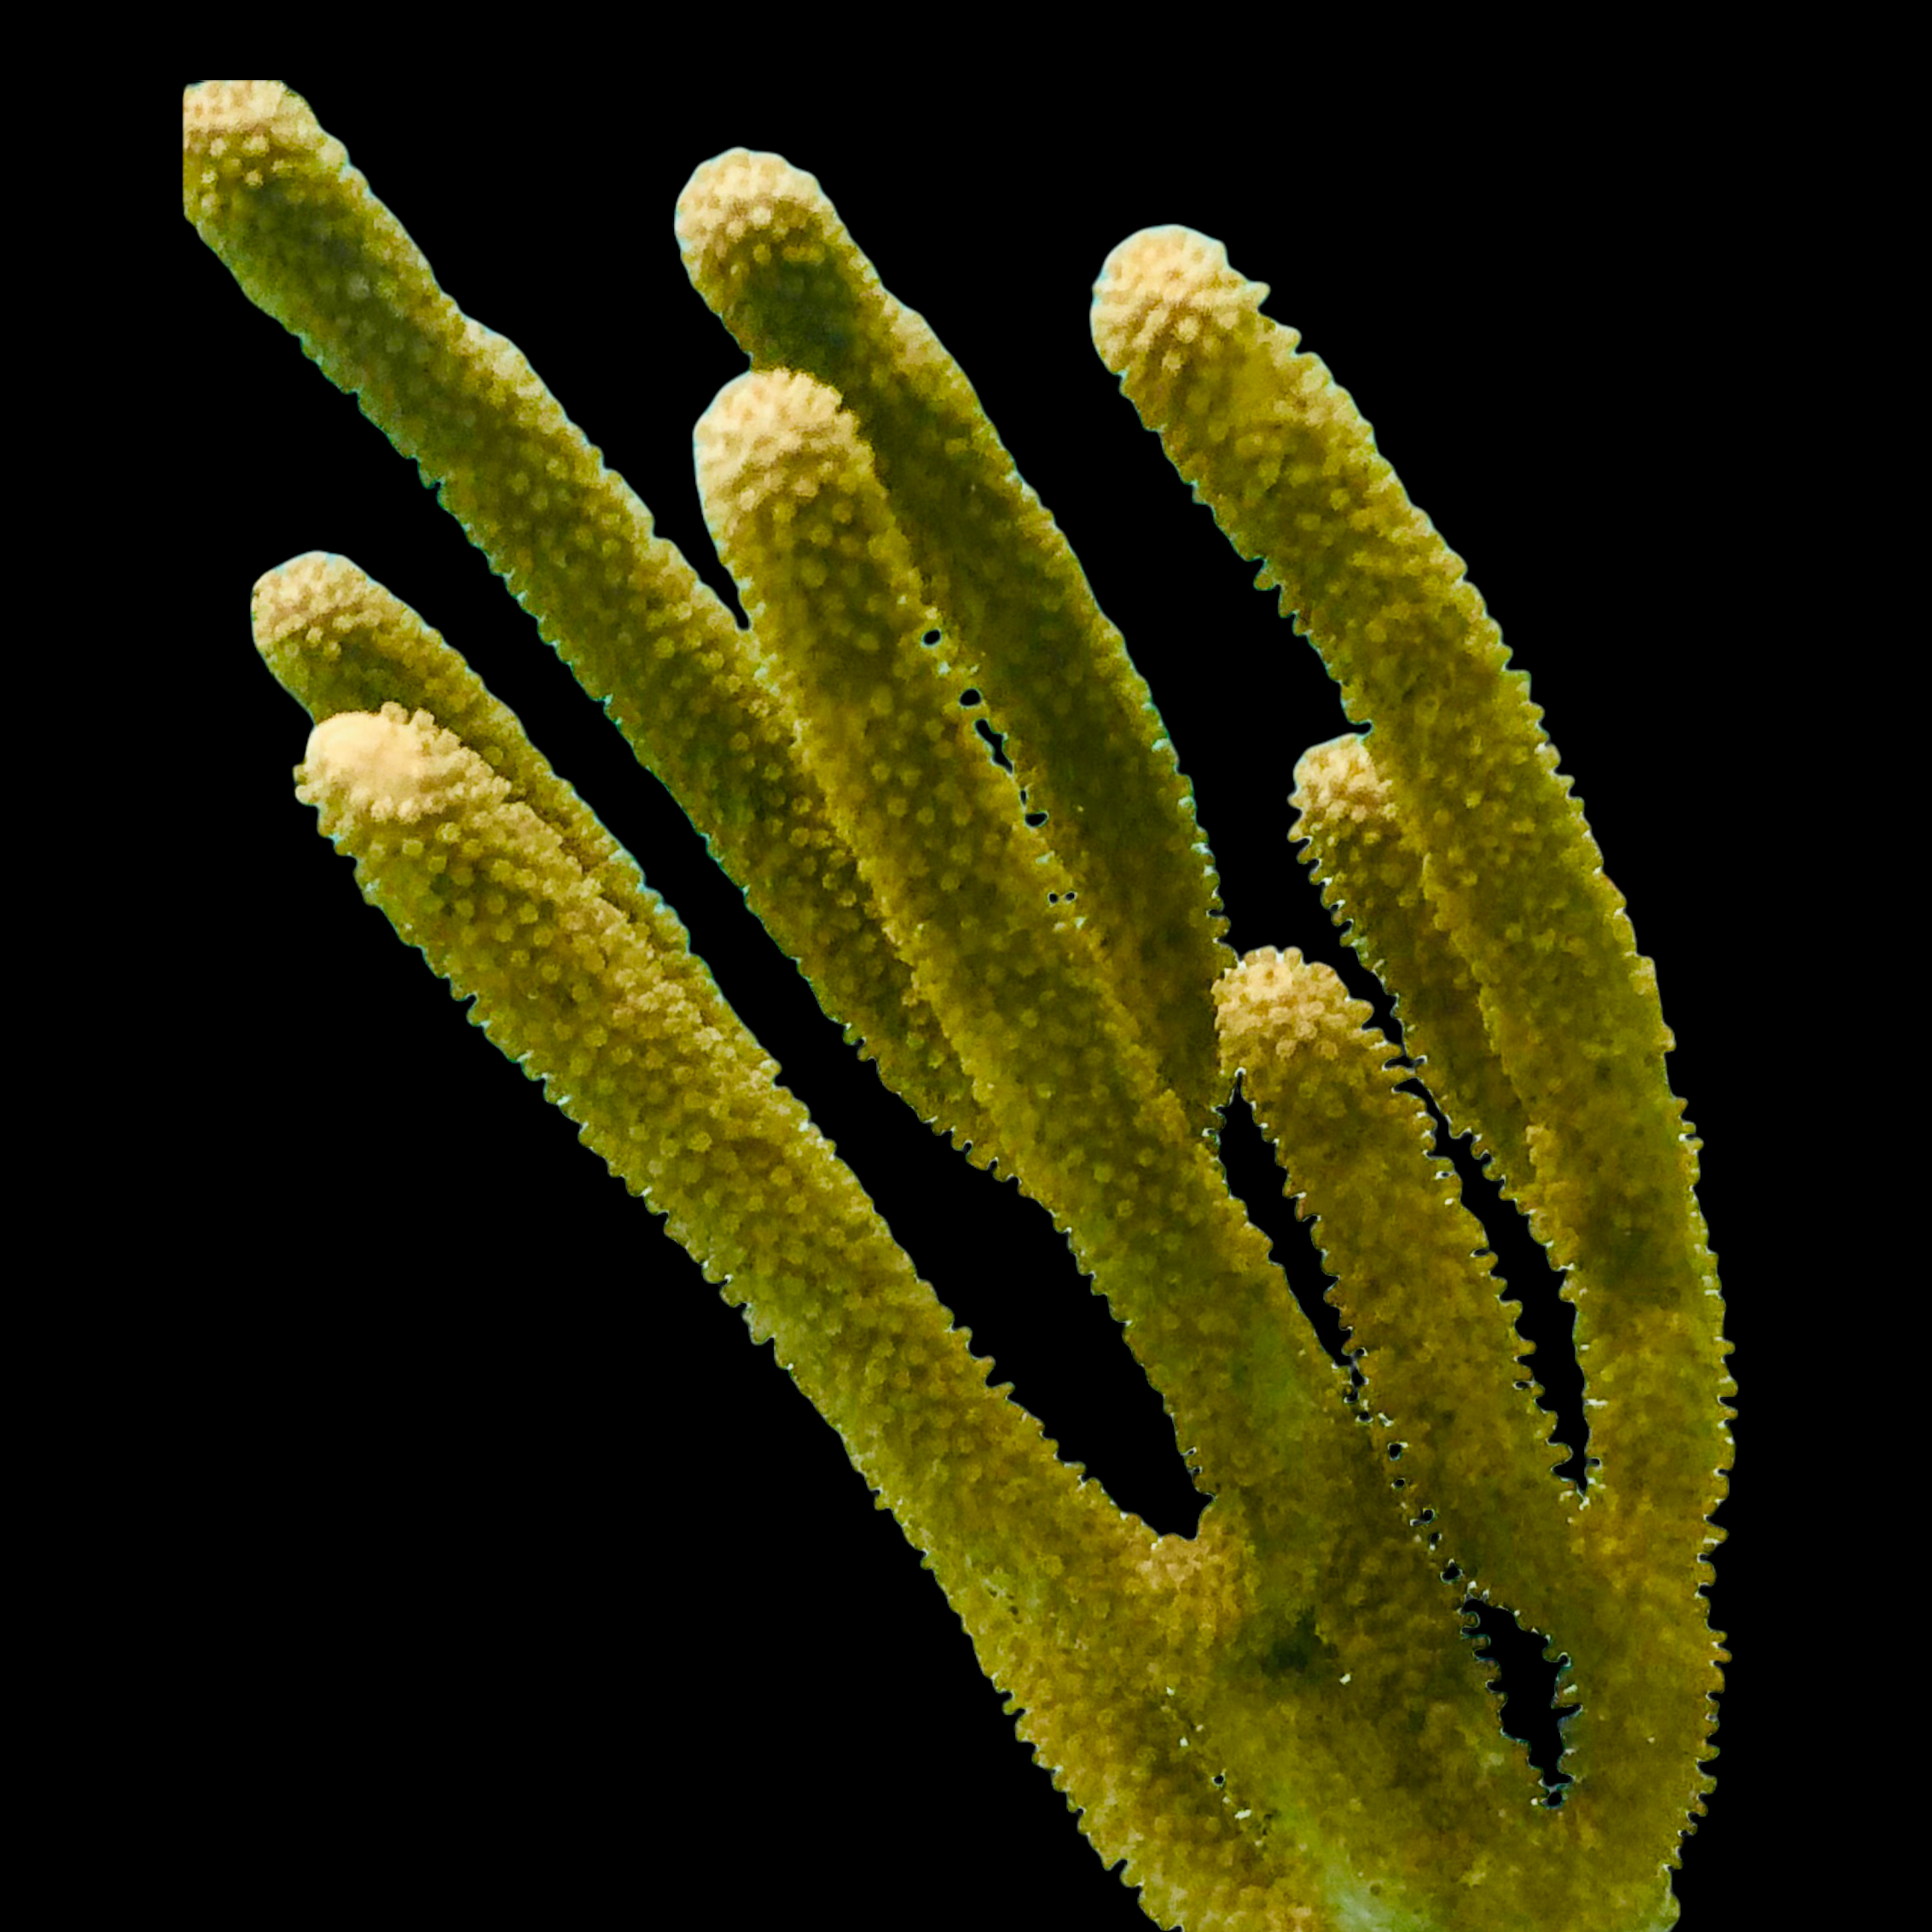 Giant Slit Pore Gorgonian-Photosynthetic (Great for Seahorse Hitching)